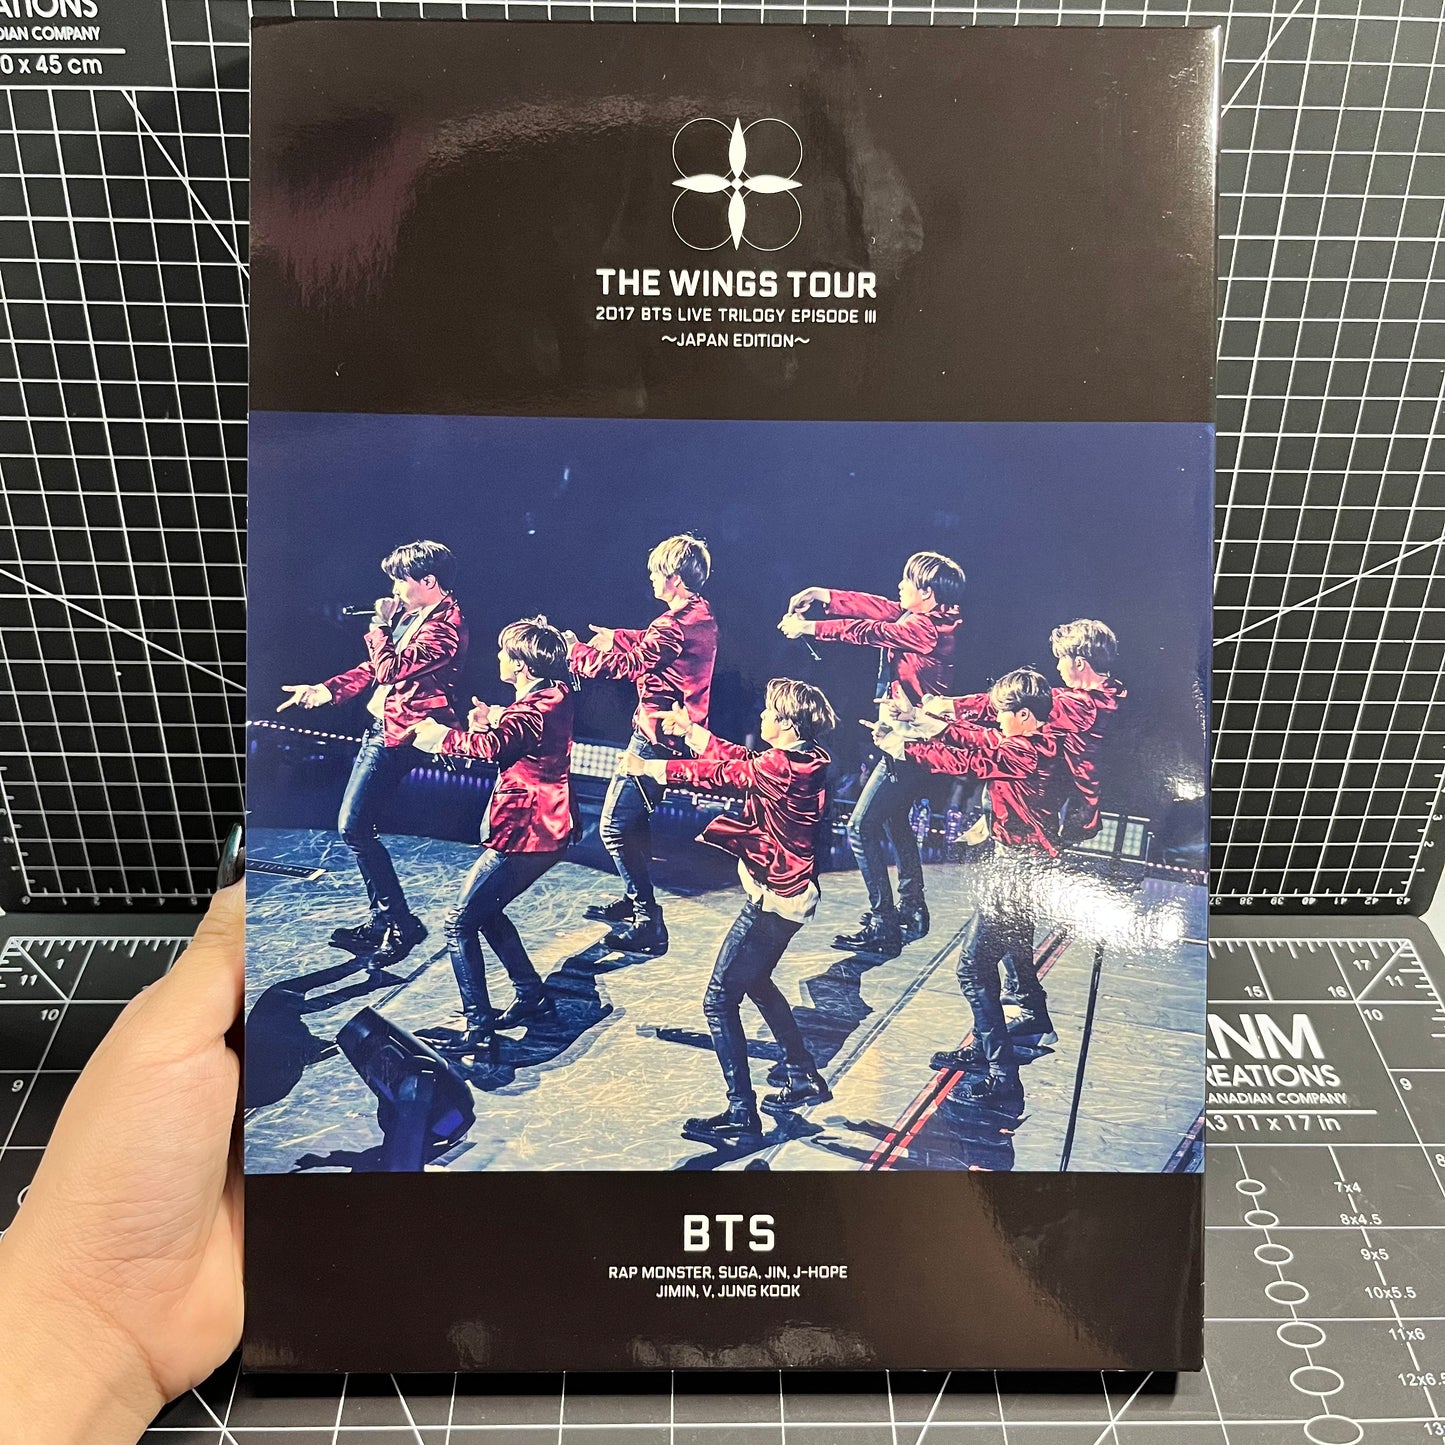 2017 BTS Live Trilogy Episode III Japan Edition The Wings Tour